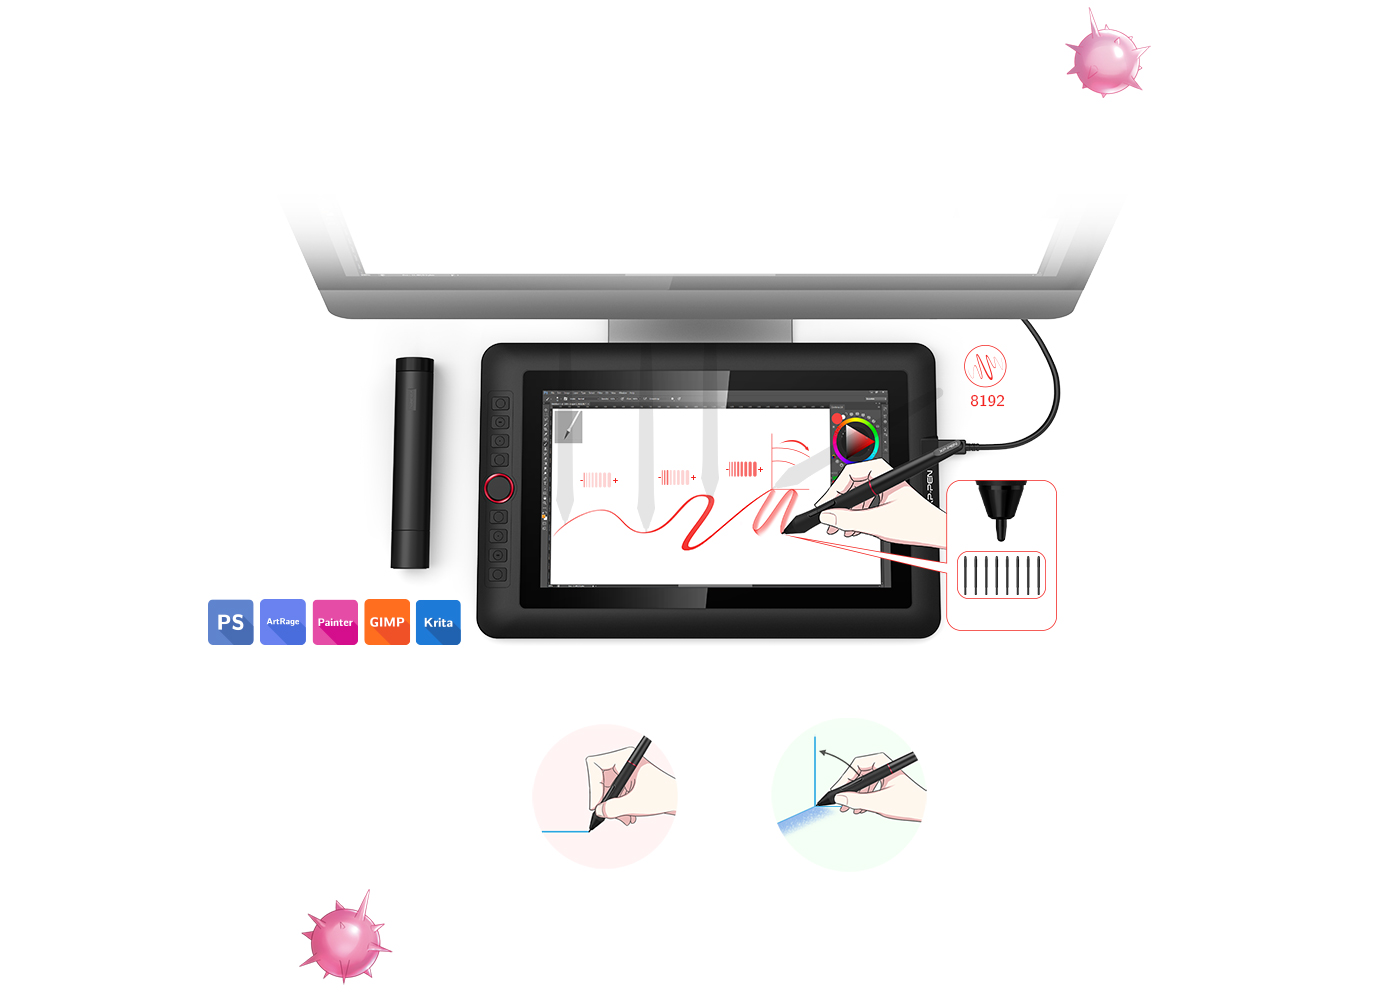 XP-Pen Artist 13.3 Pro portable drawing monitor supports up to 60 degrees of tilt function